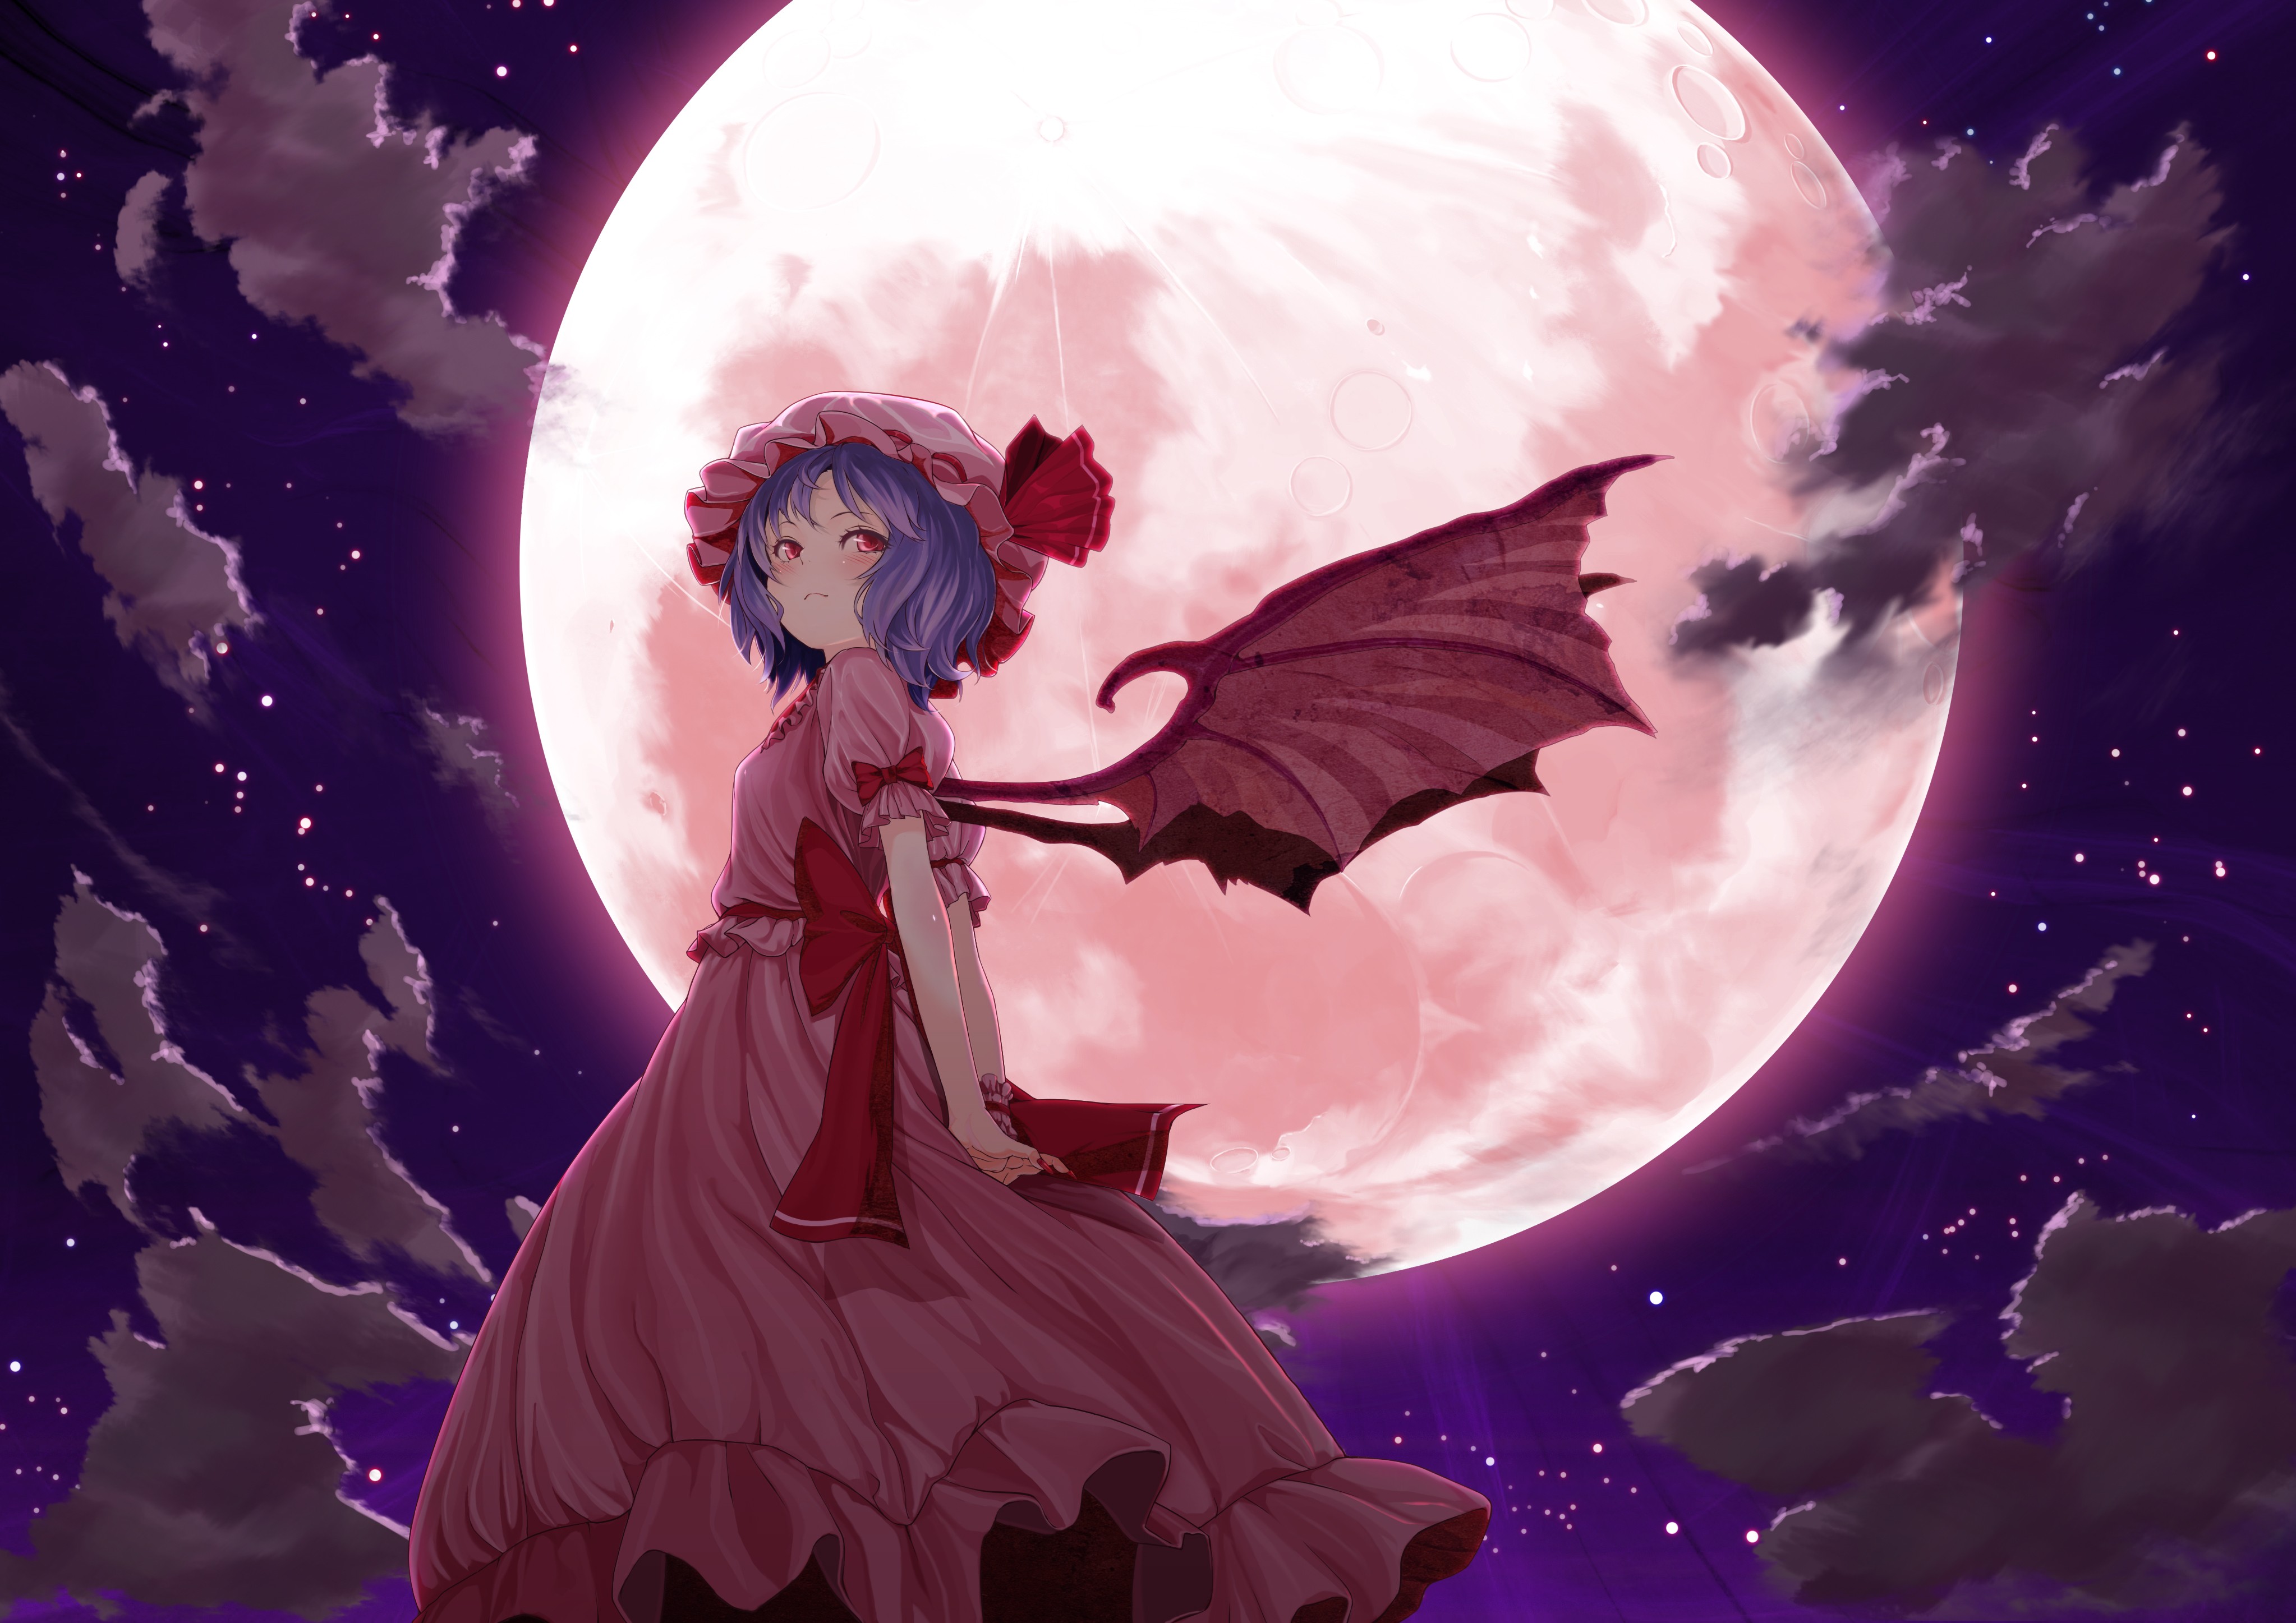 video, Games, Clouds, Touhou, Wings, Dress, Night, Stars, Moon, Purple, Hair, Short, Hair, Bows, Red, Dress, Skyscapes, Pink, Dress, Full, Moon, Remilia, Scarlet Wallpaper